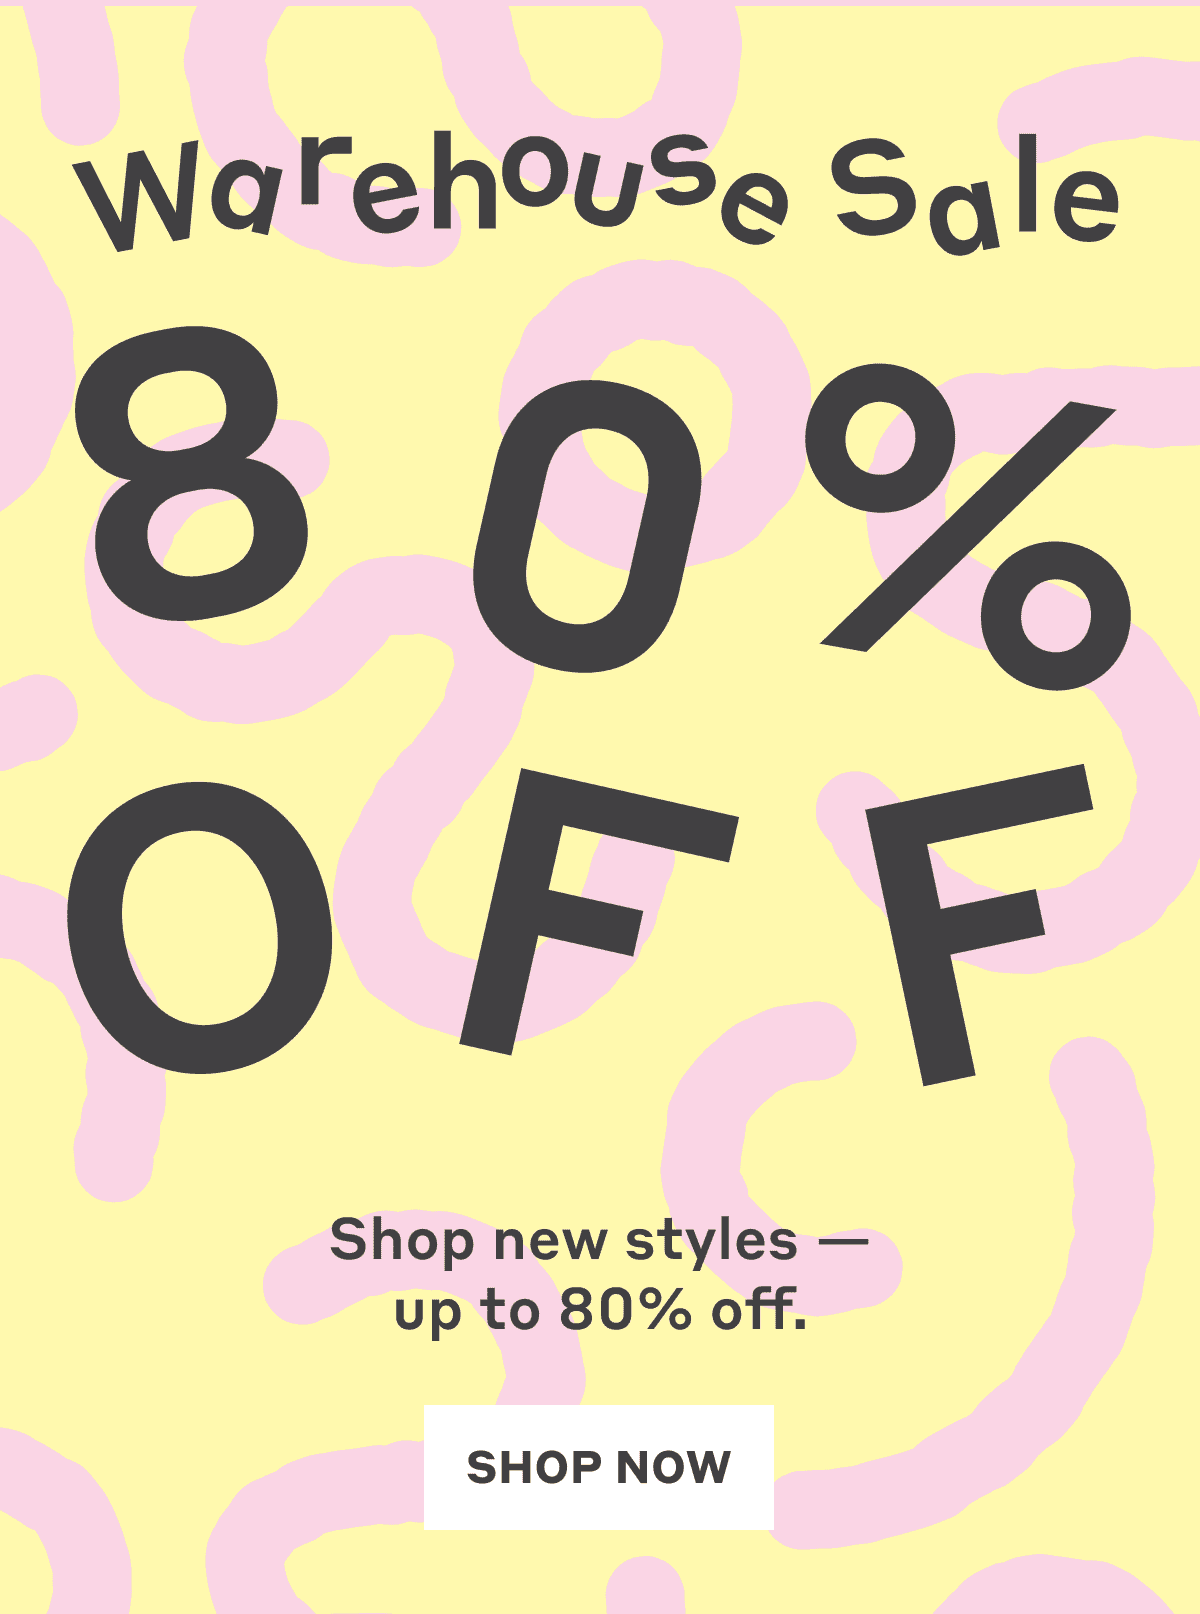 Warehouse Sale - Up to 80% Off